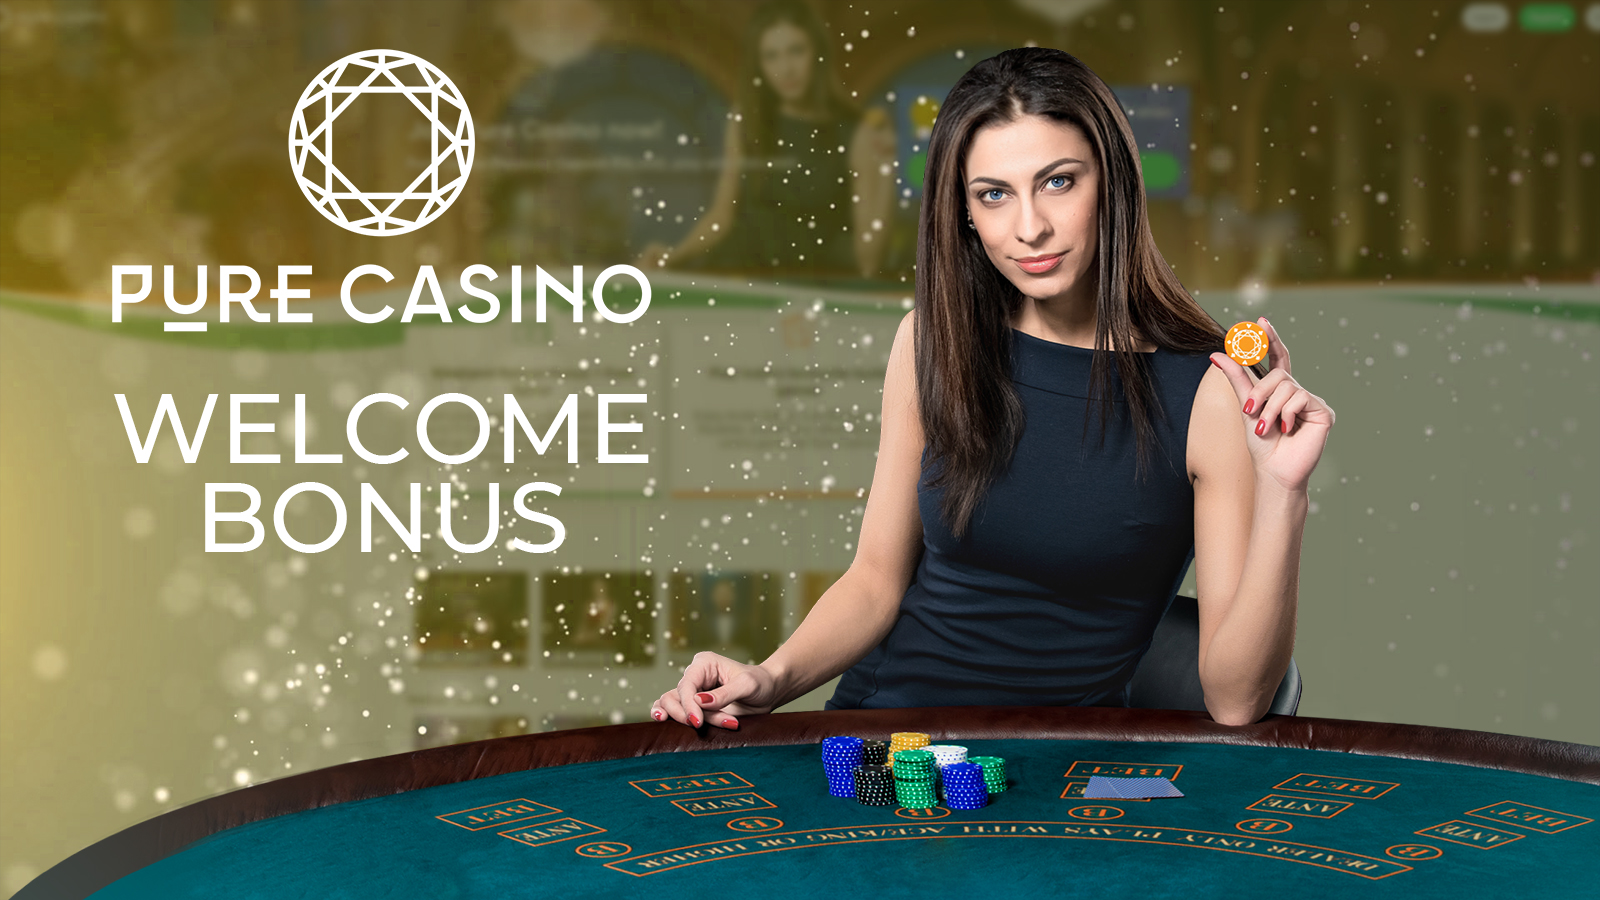 Do not forget to delete cookies before registering, to receive the Pure Casino bonus.